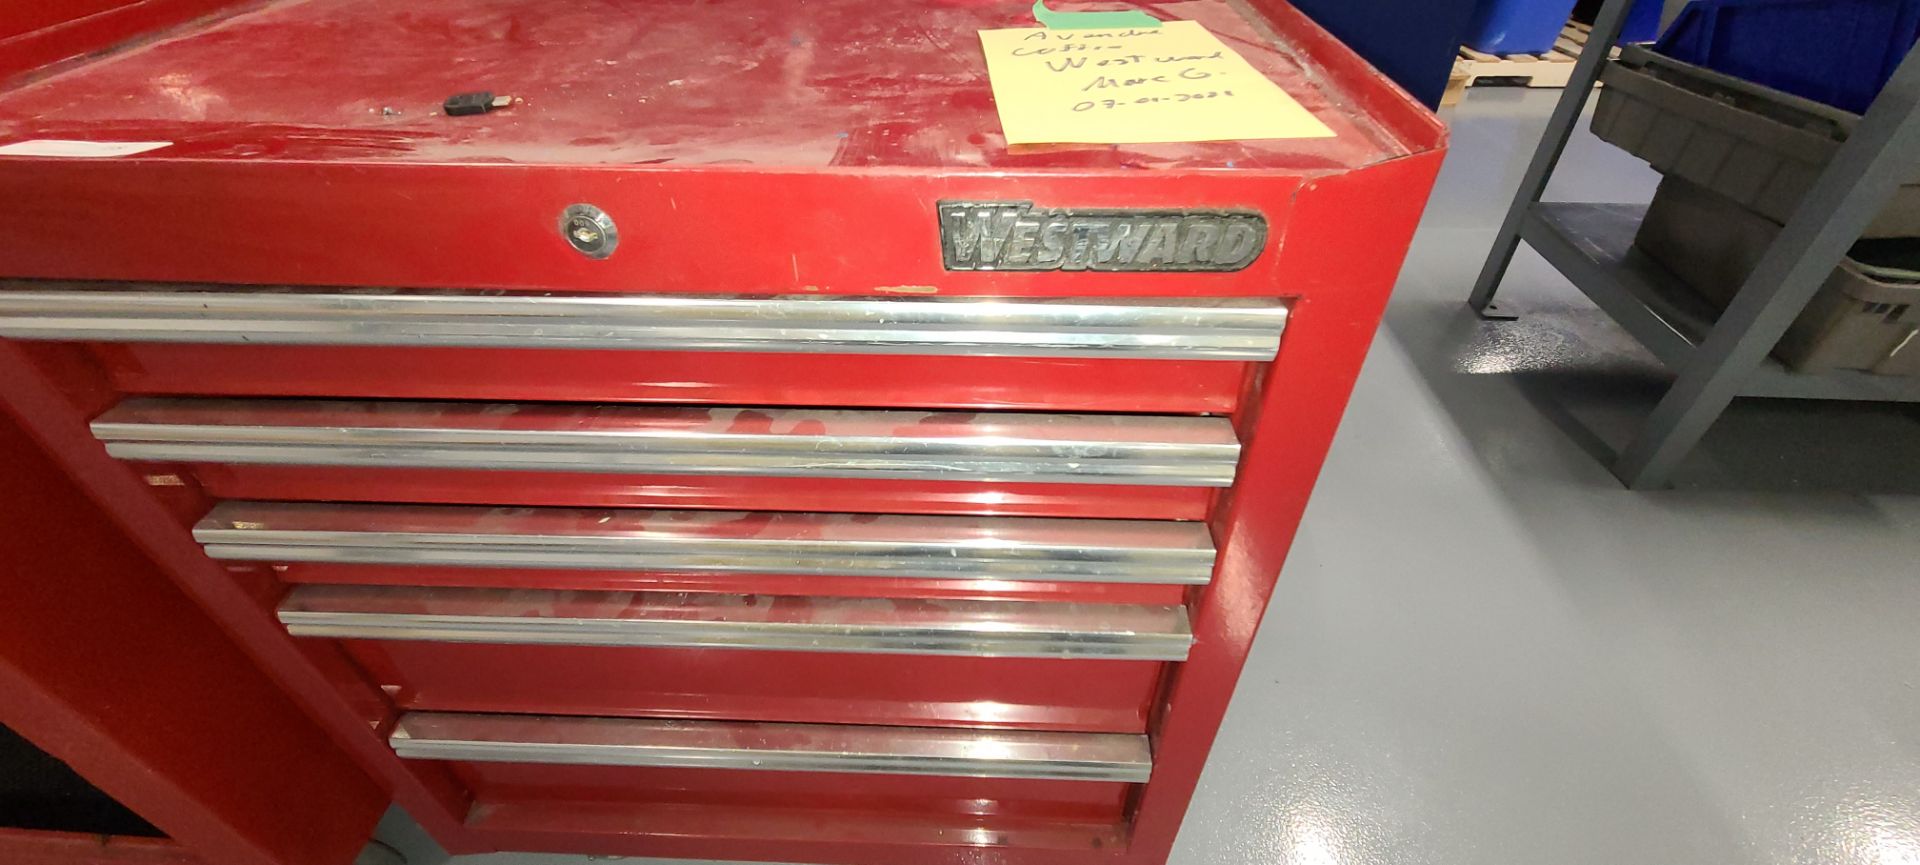 Westward rolling Tool Chest - Image 2 of 4